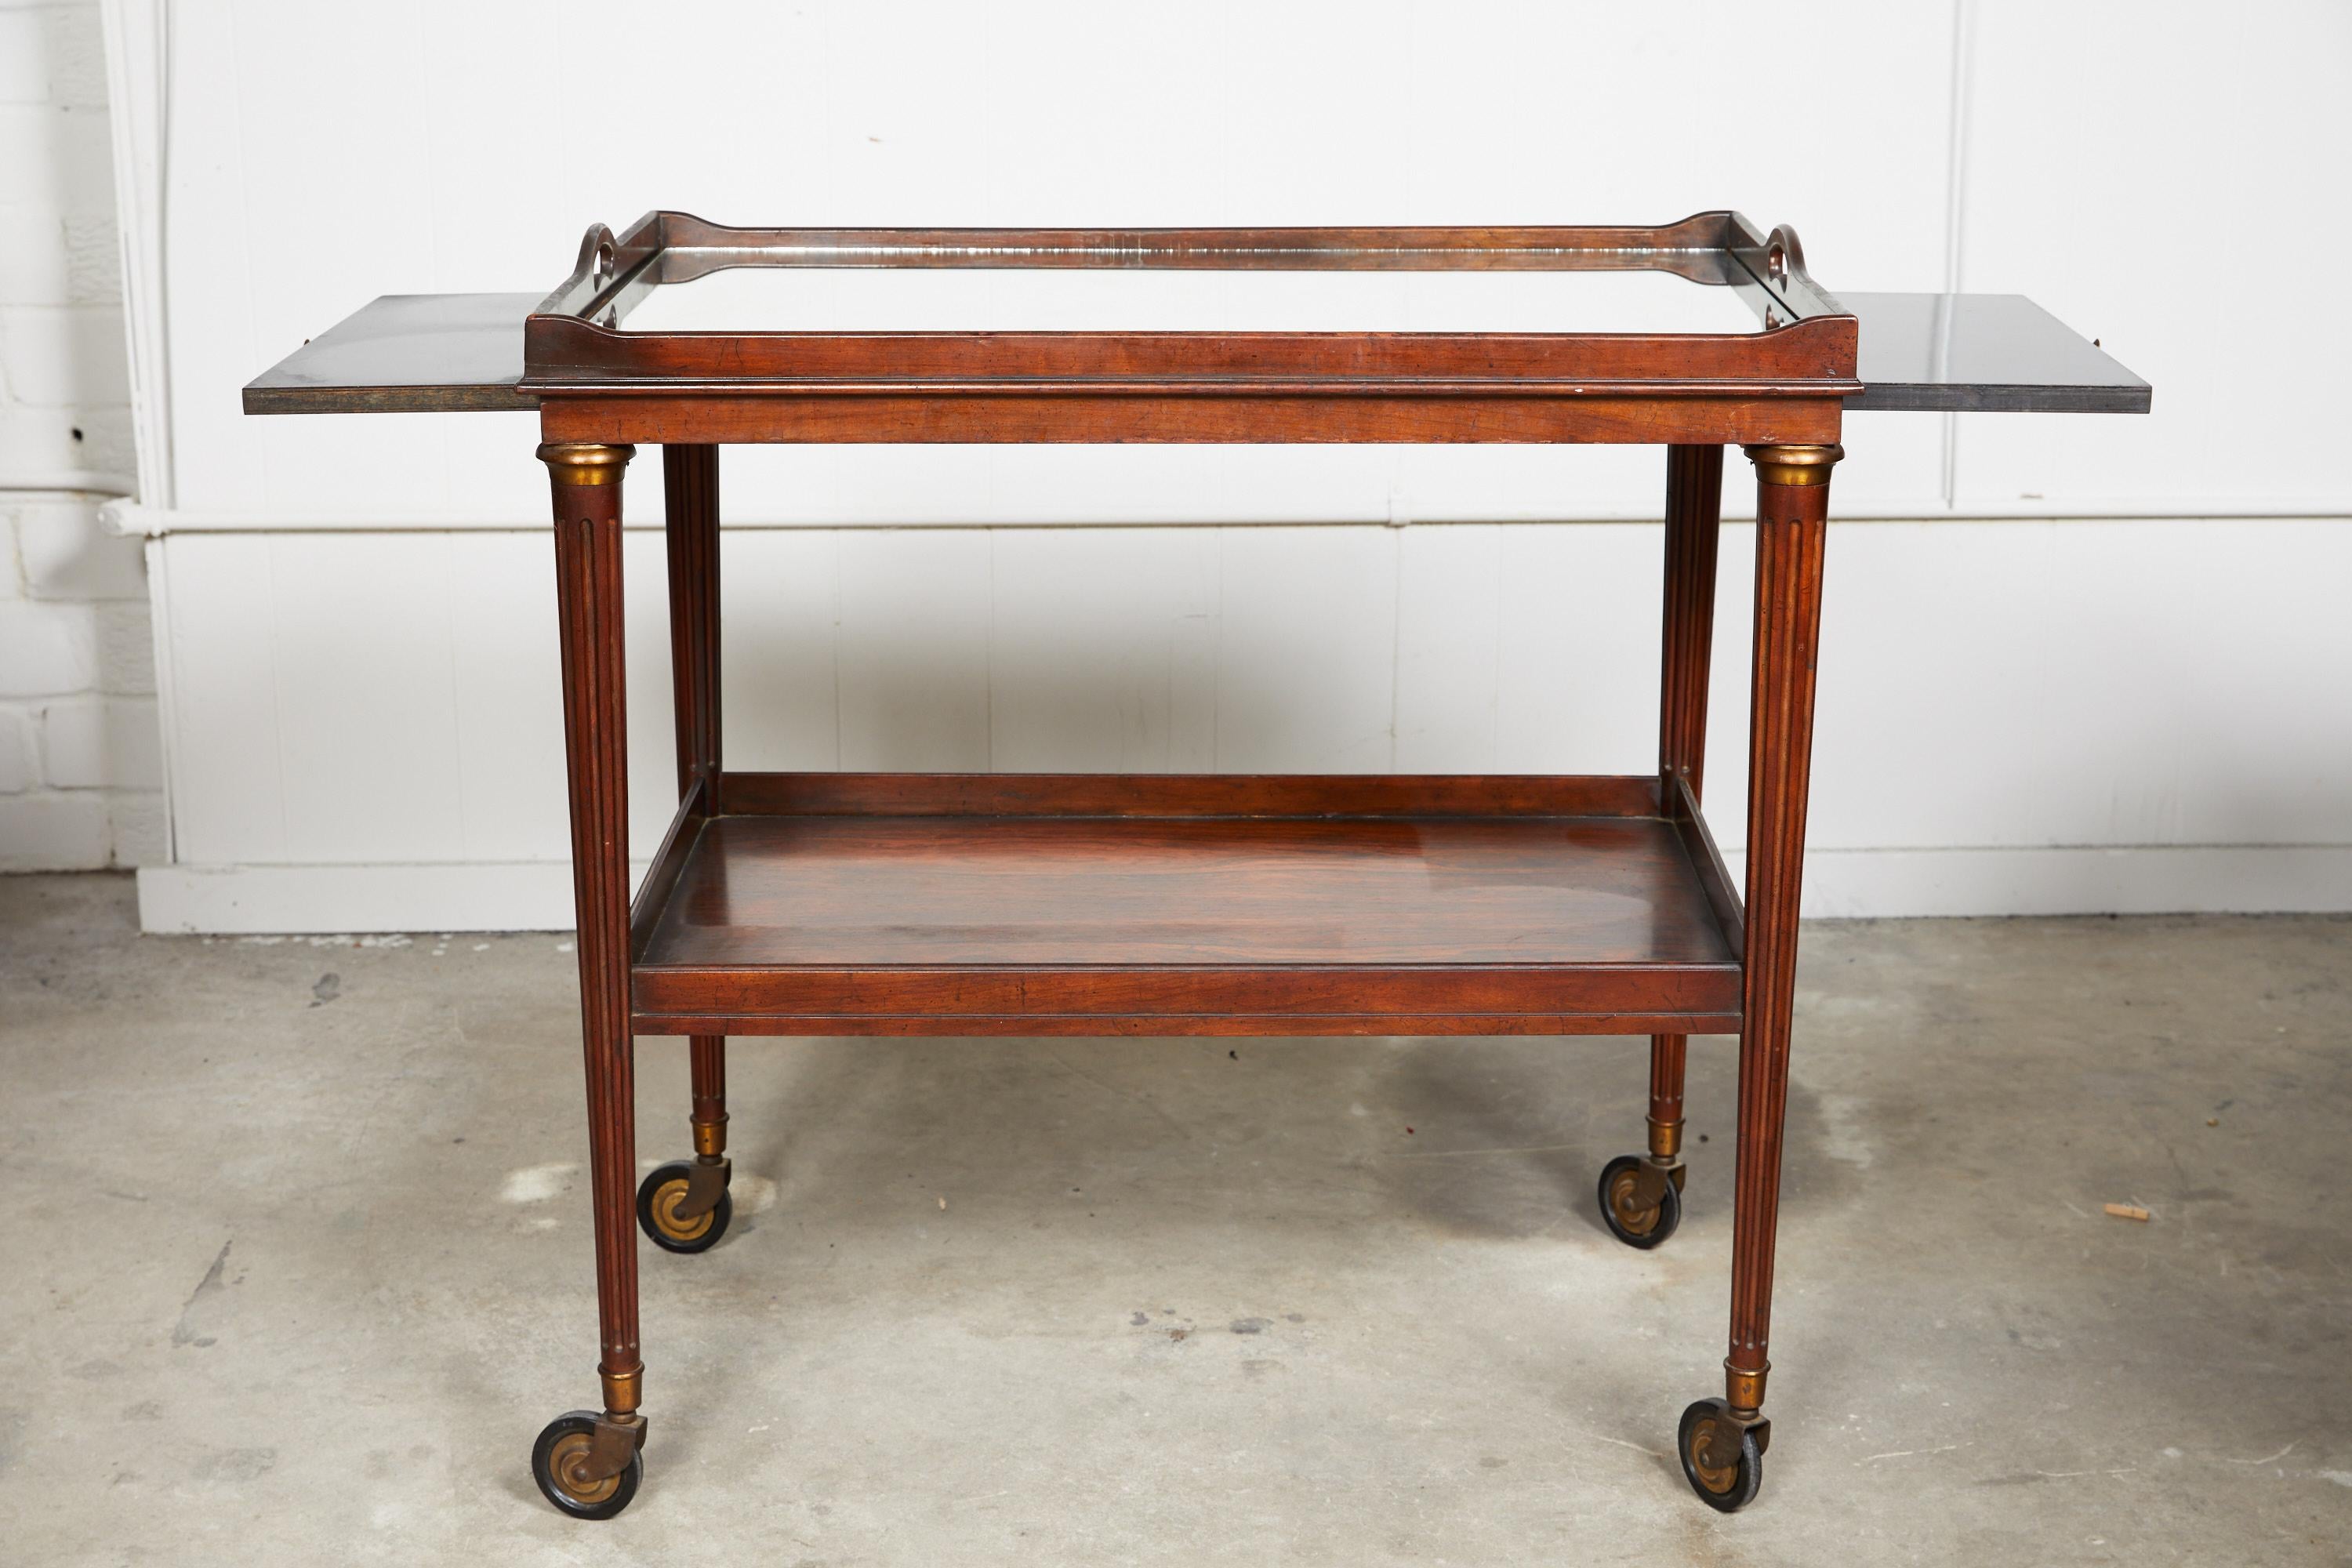 Regency 20th Century Two-Tier Bar Cart of Rosewood with Mirrored Top